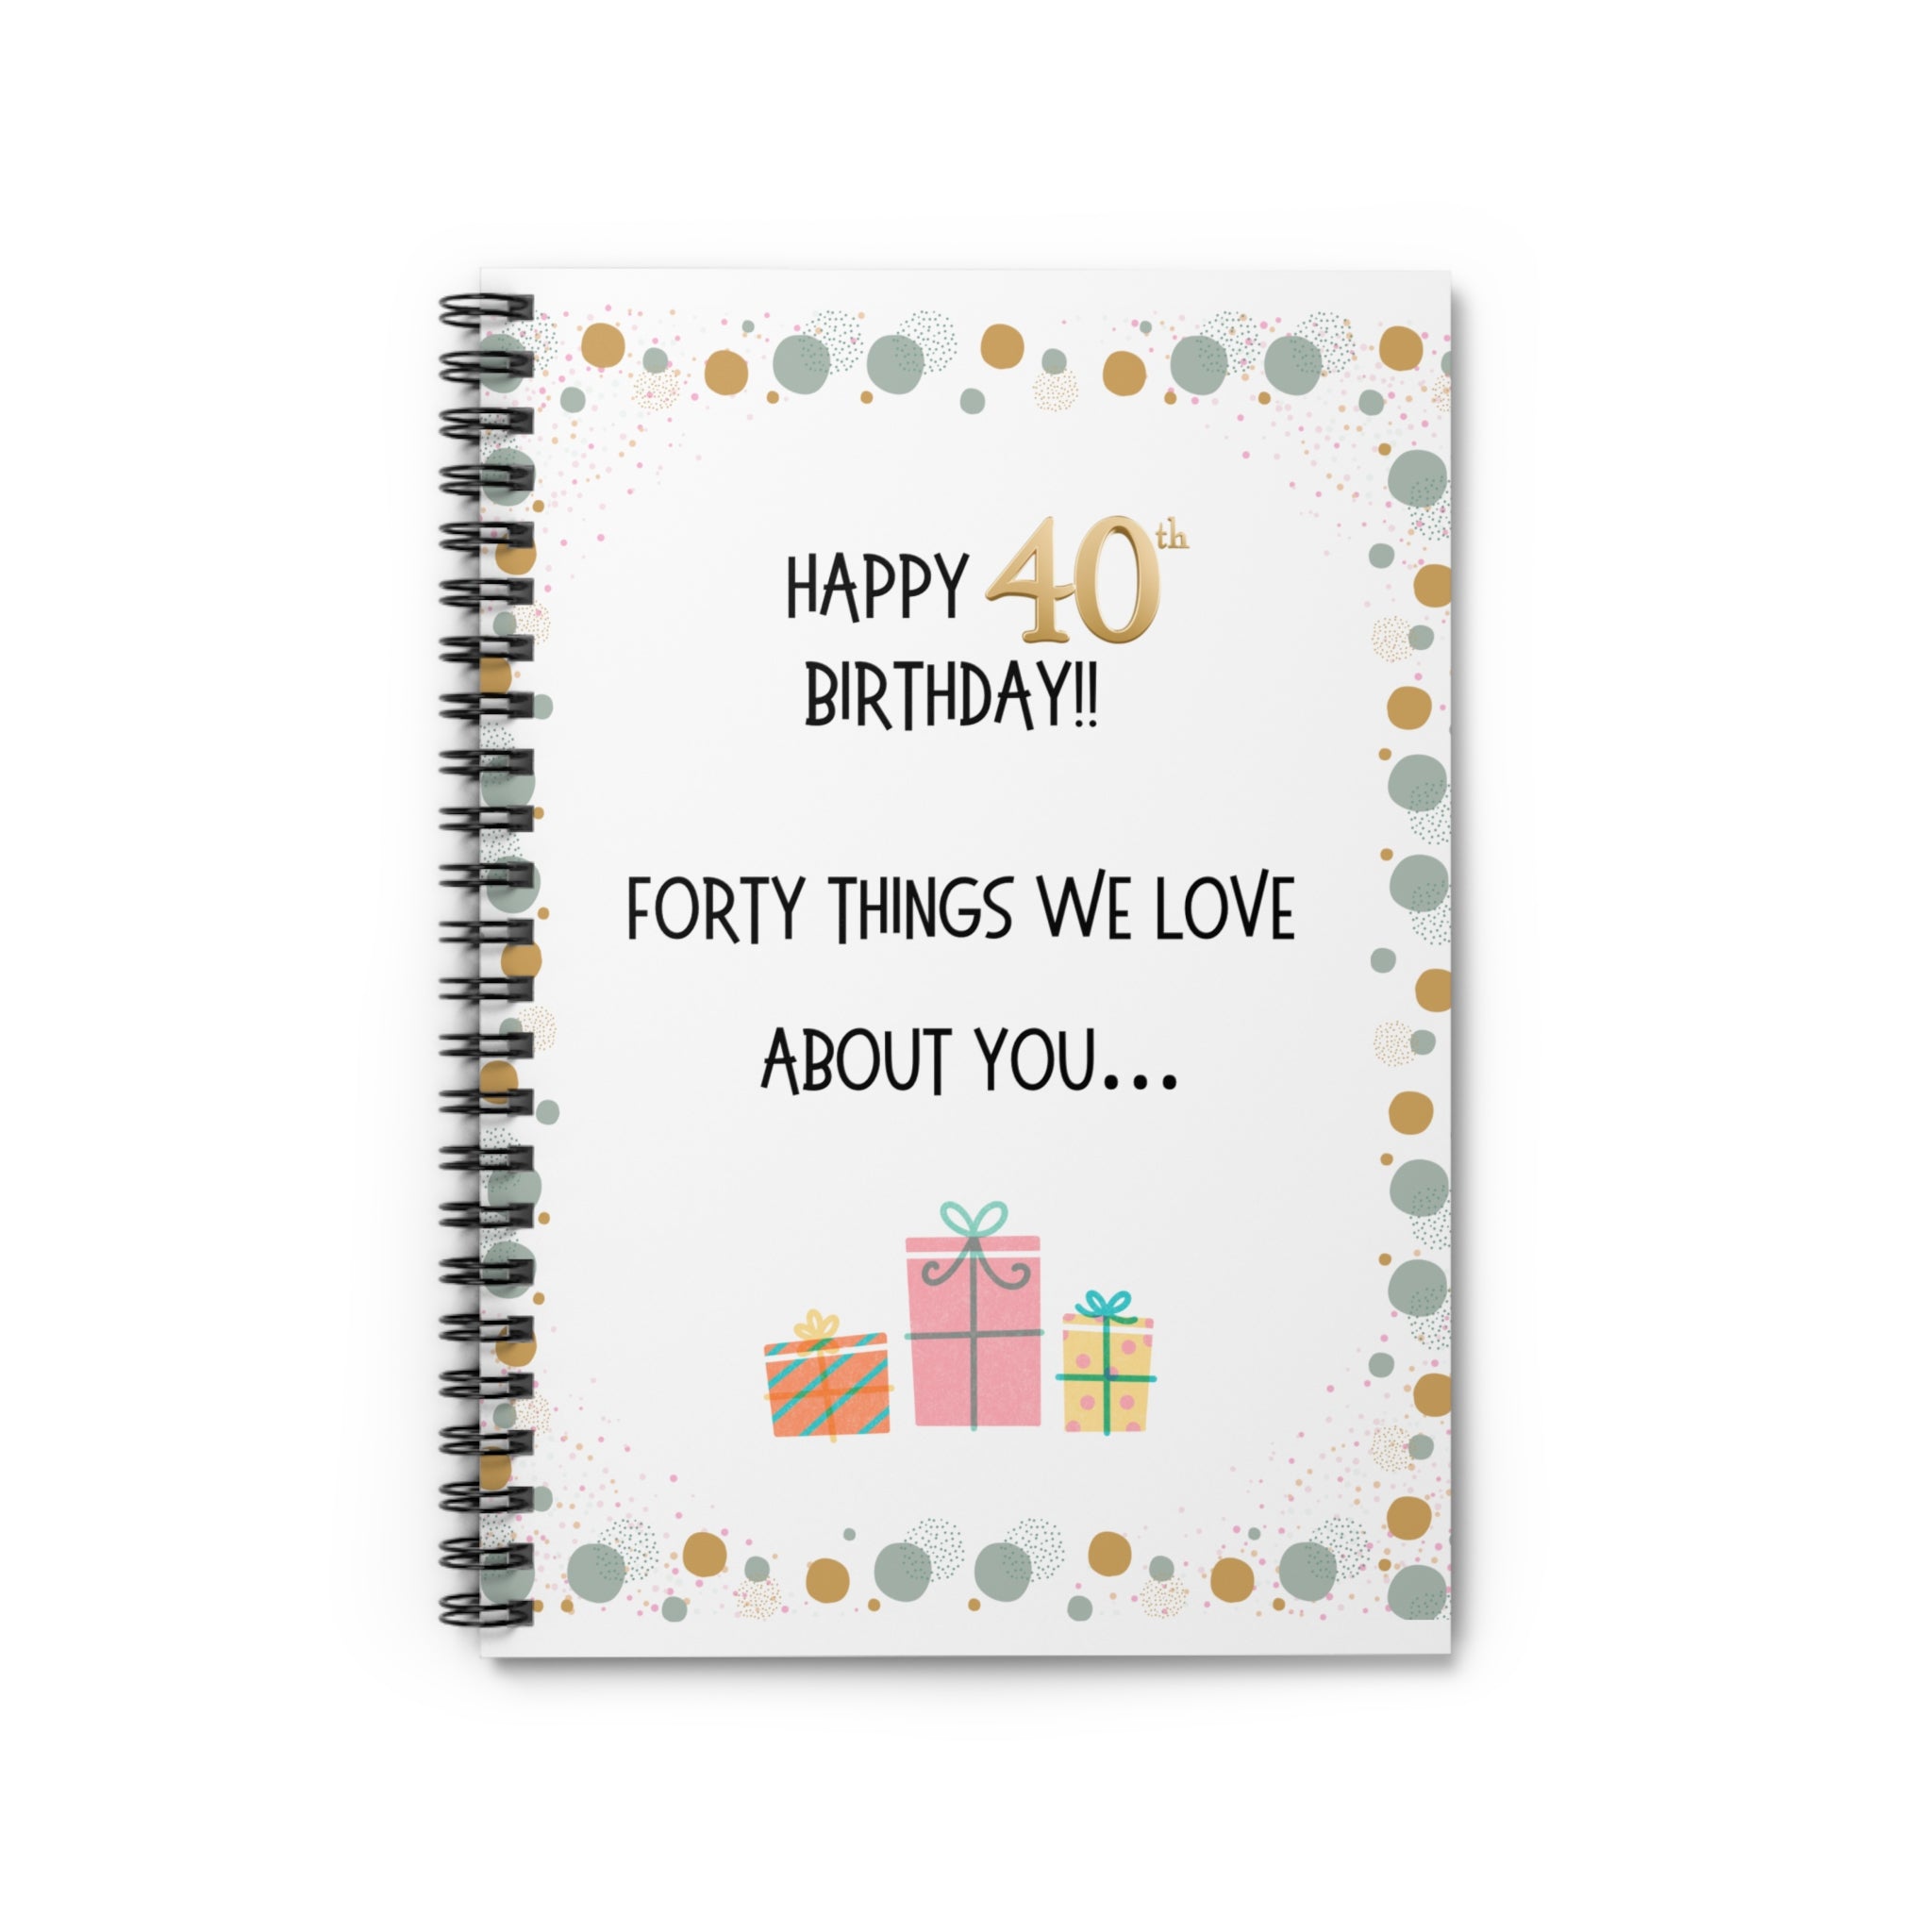 We Love You Birthday Gift Idea For Her- Personalization Option